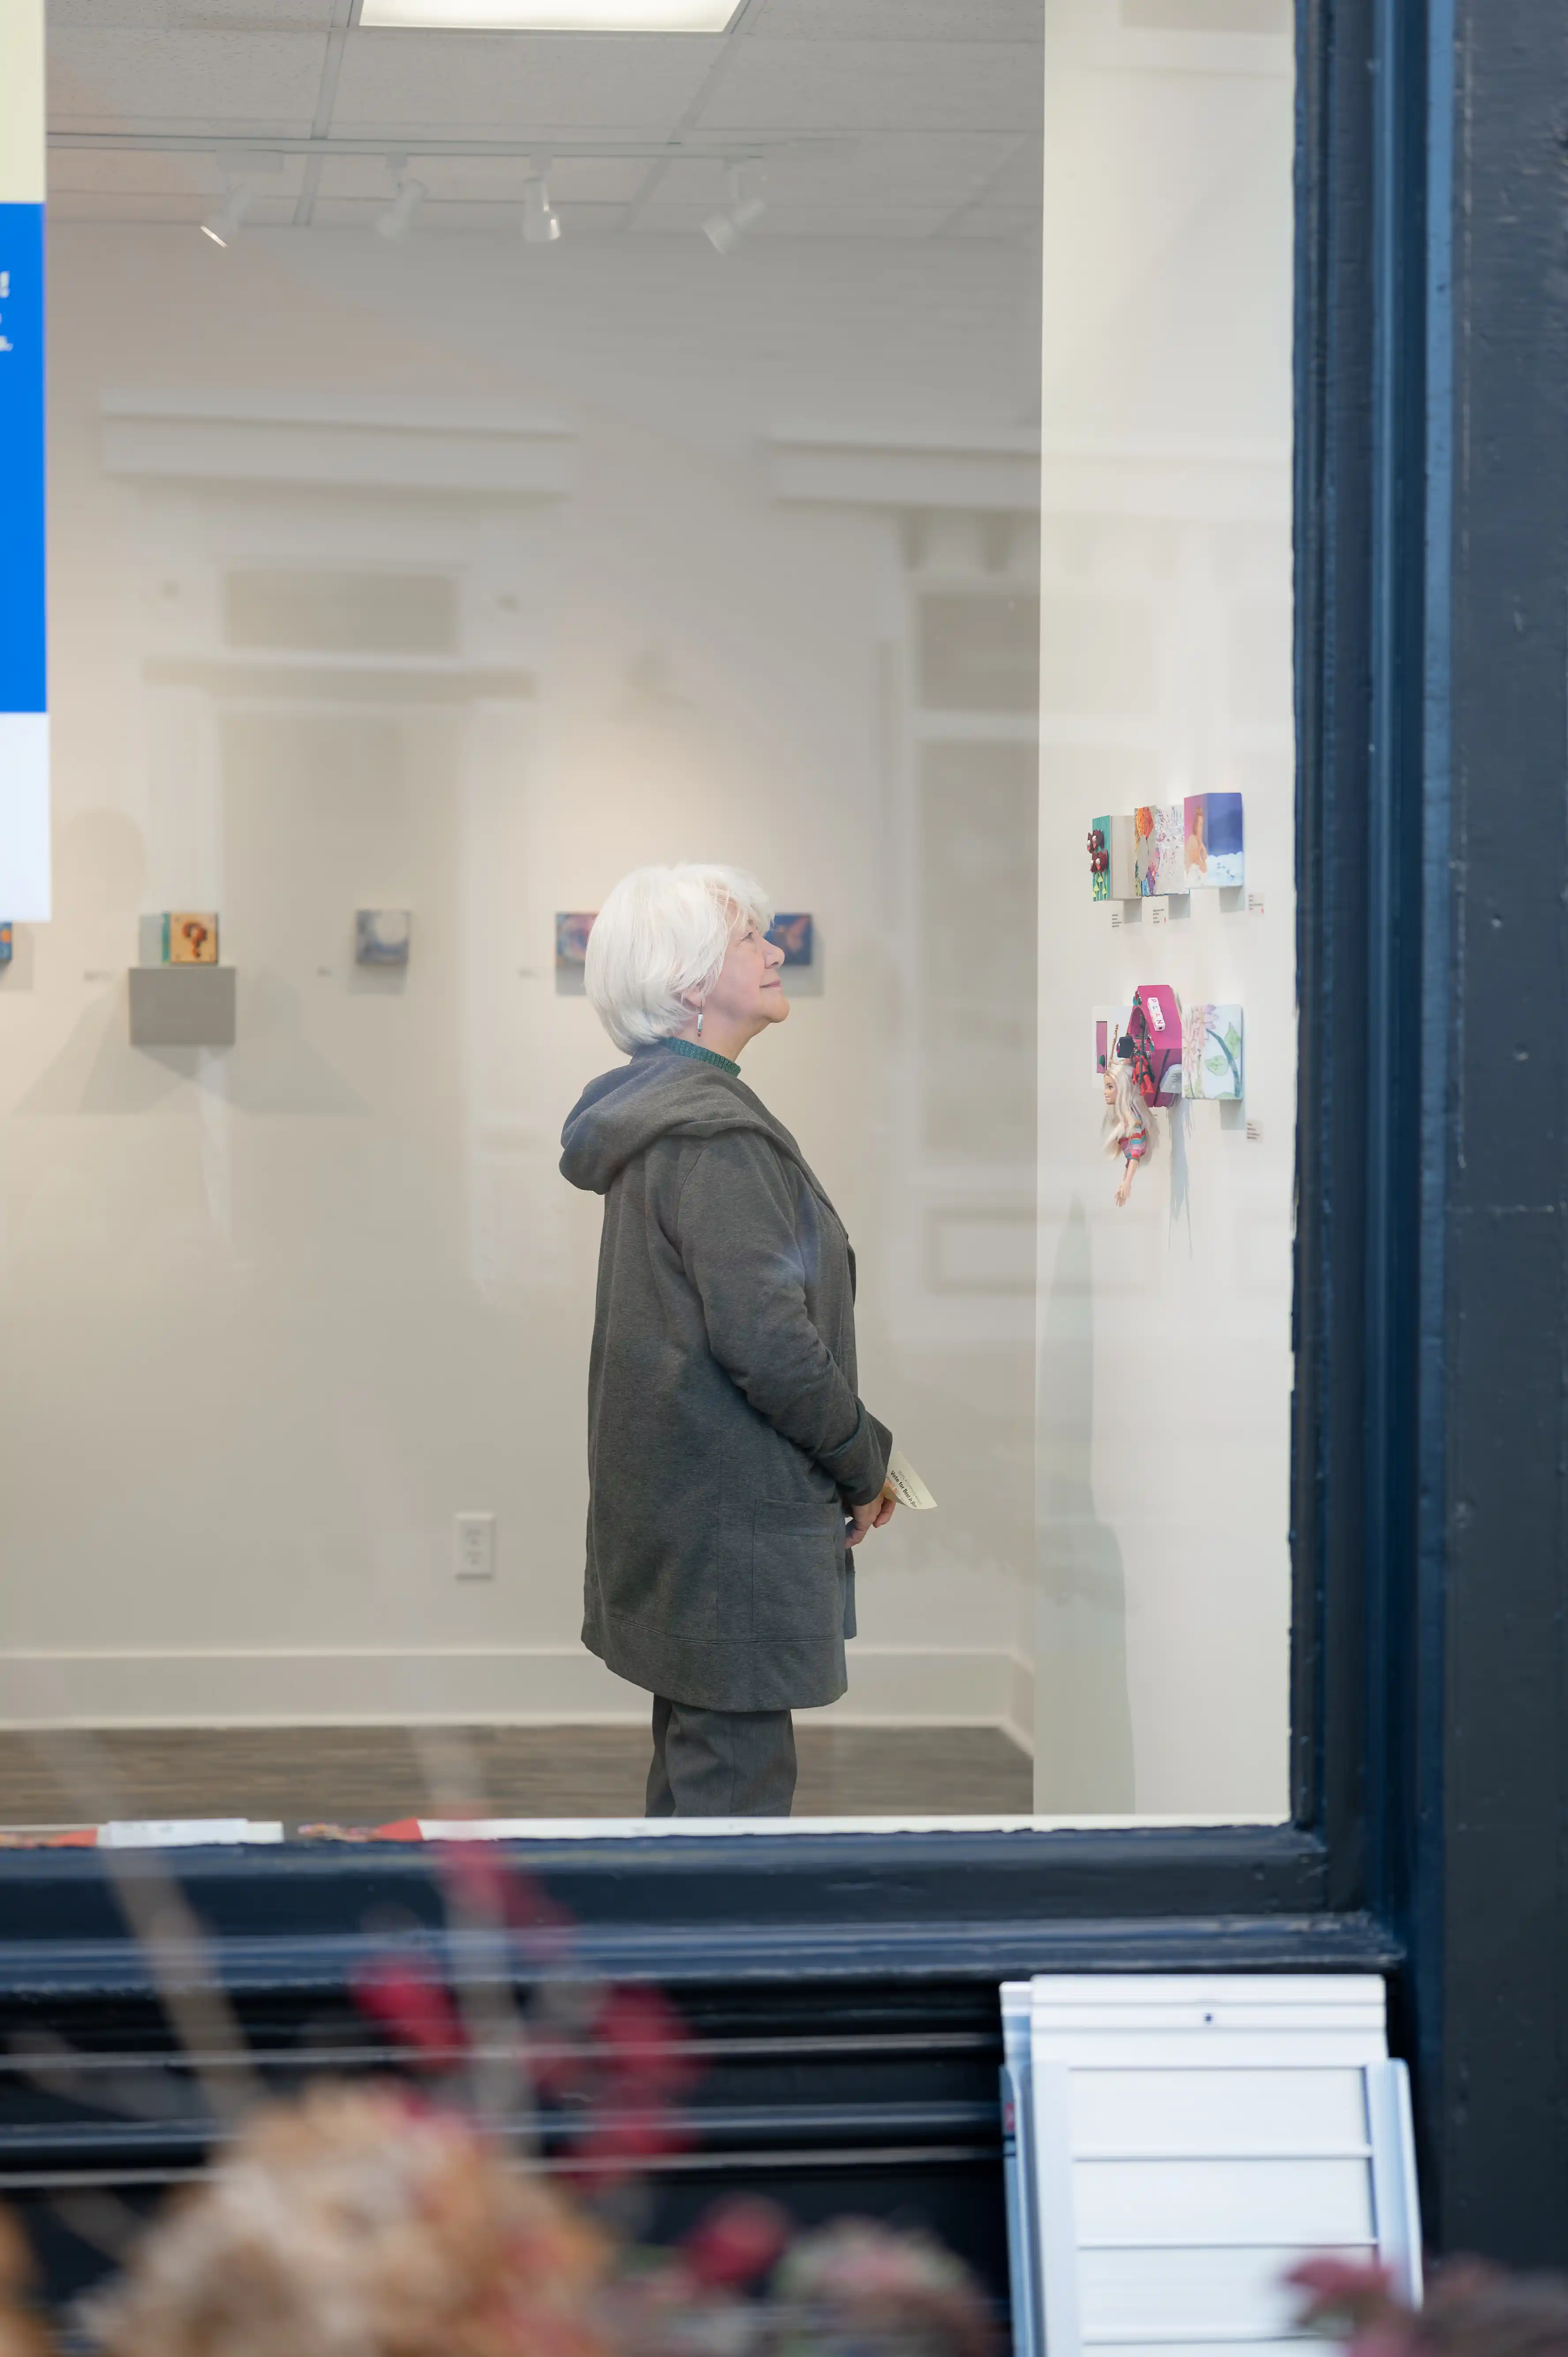 Person standing and looking at artwork in a gallery through the display window.